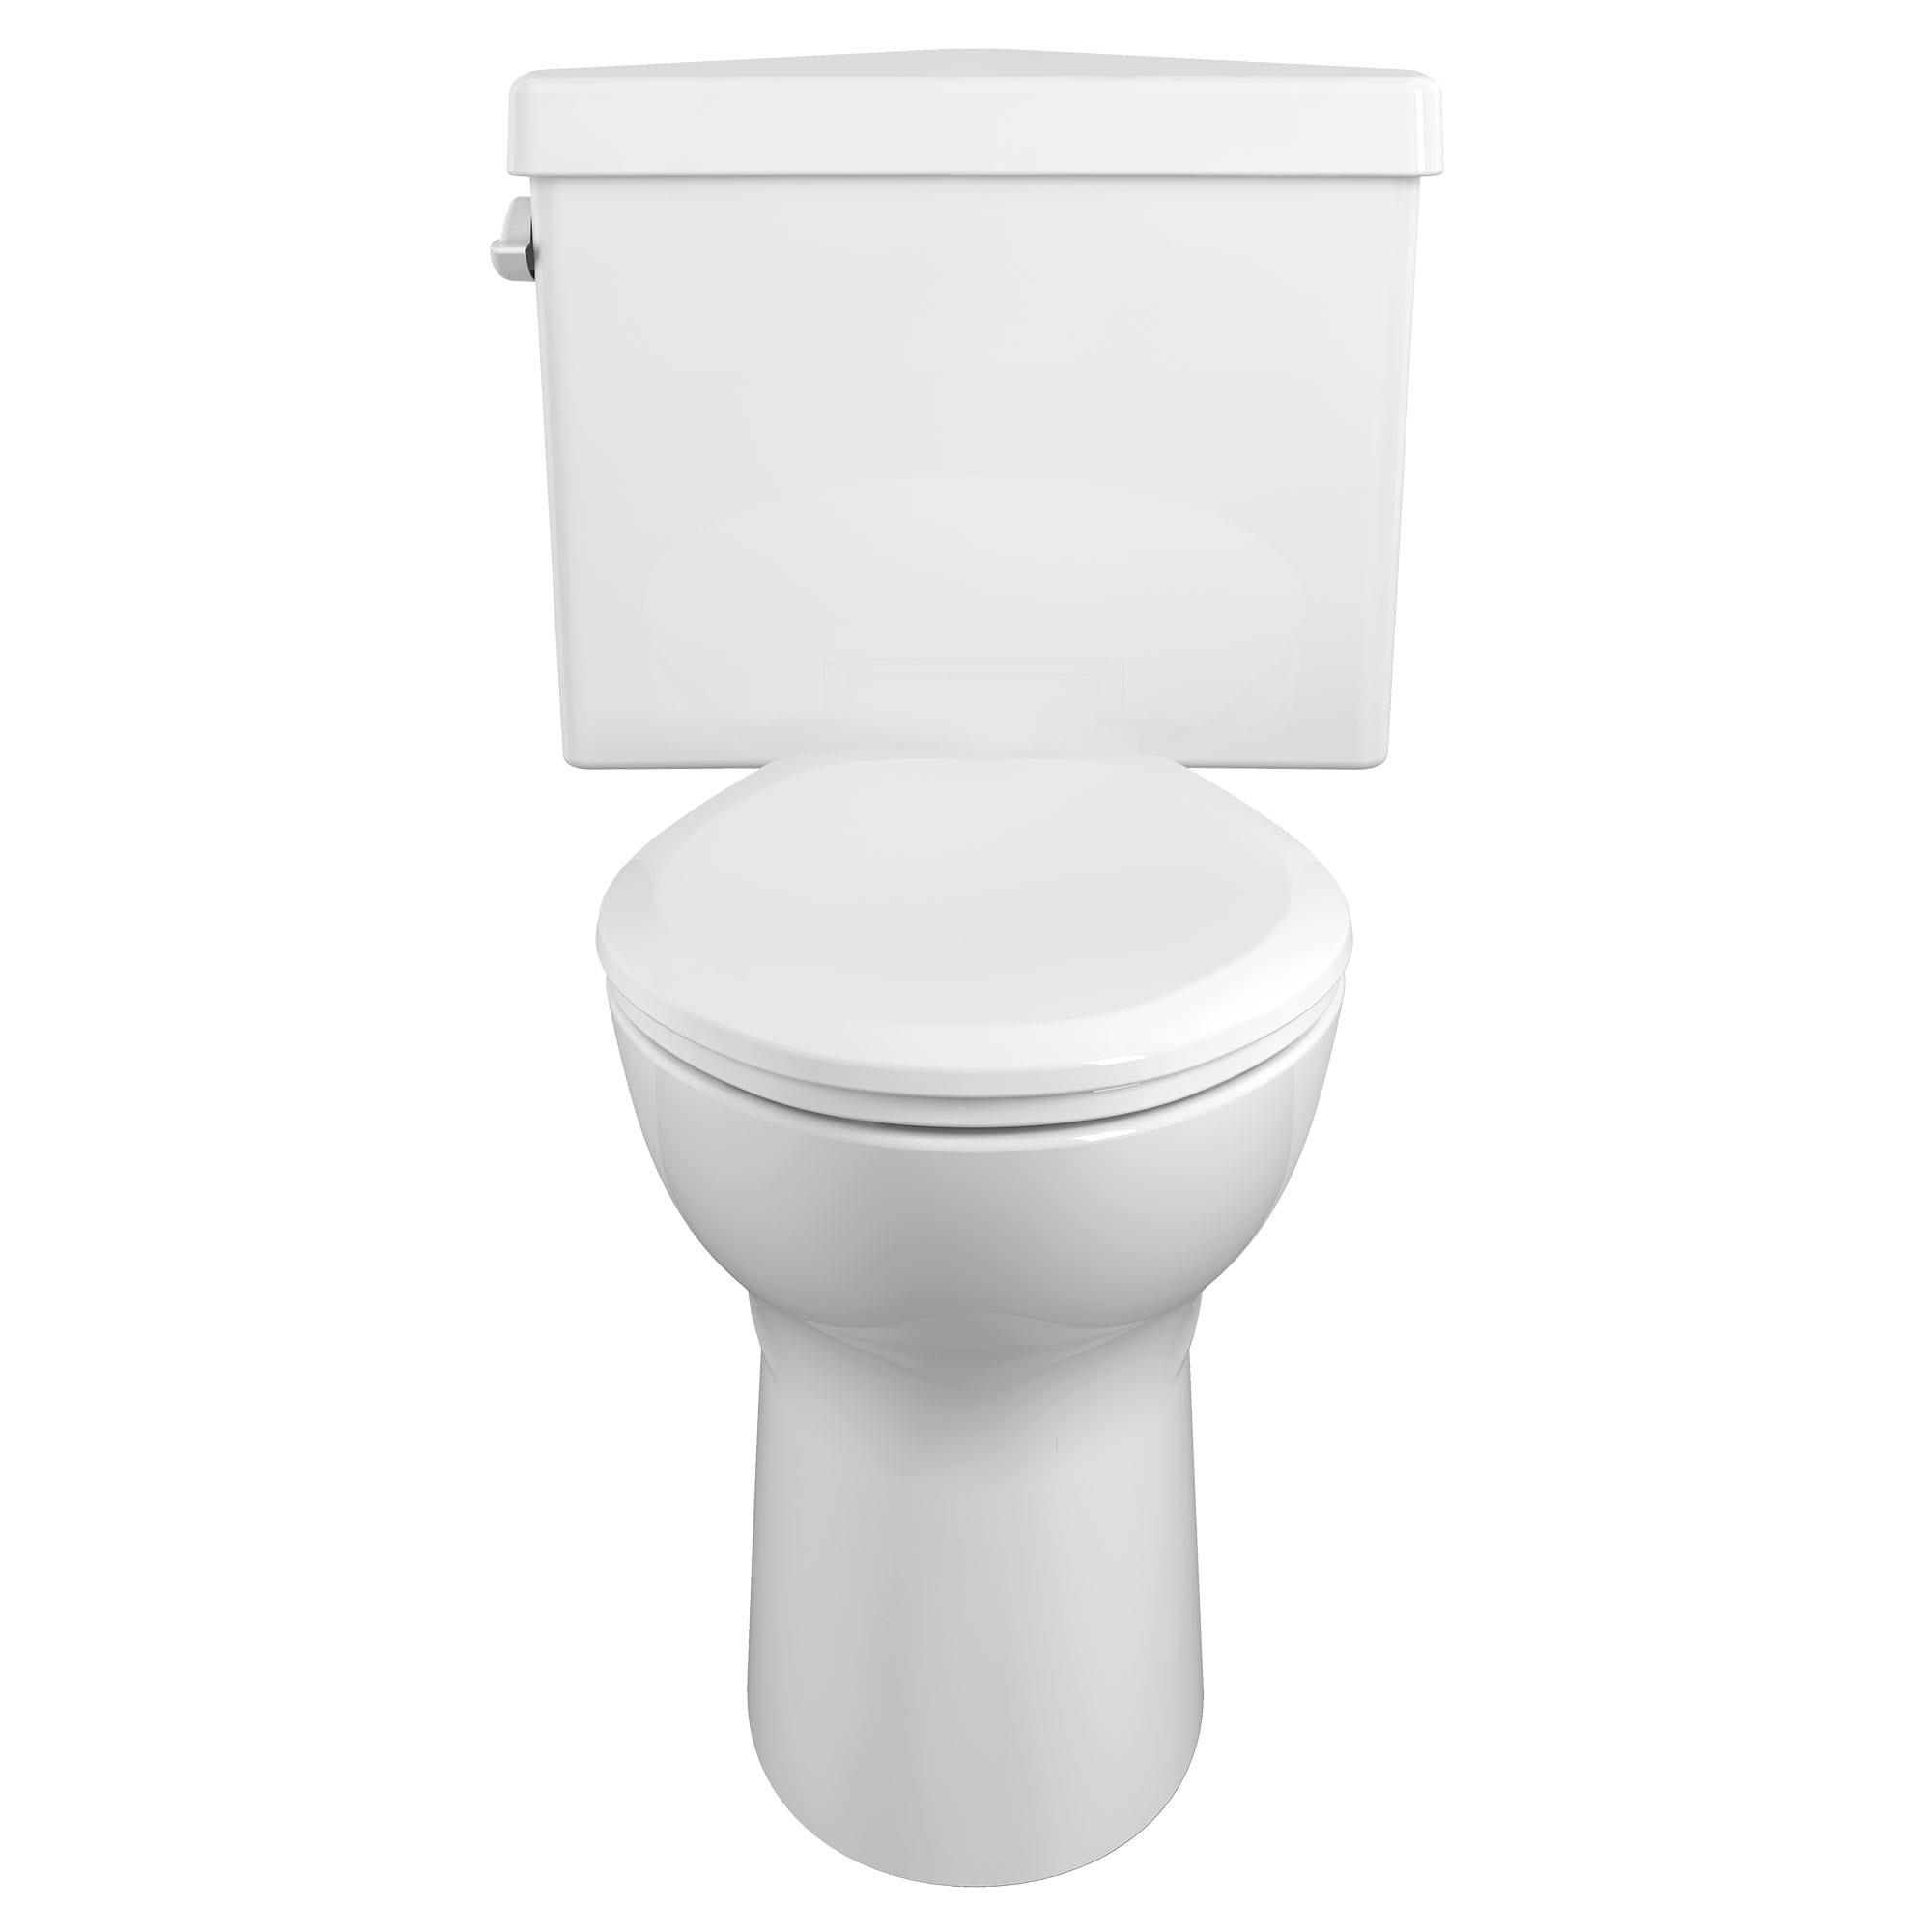 Cadet 3 Triangle 1.6 GPF/6.0 LPF Left Trip Lever Chair Height  Elongated-Front Toilet